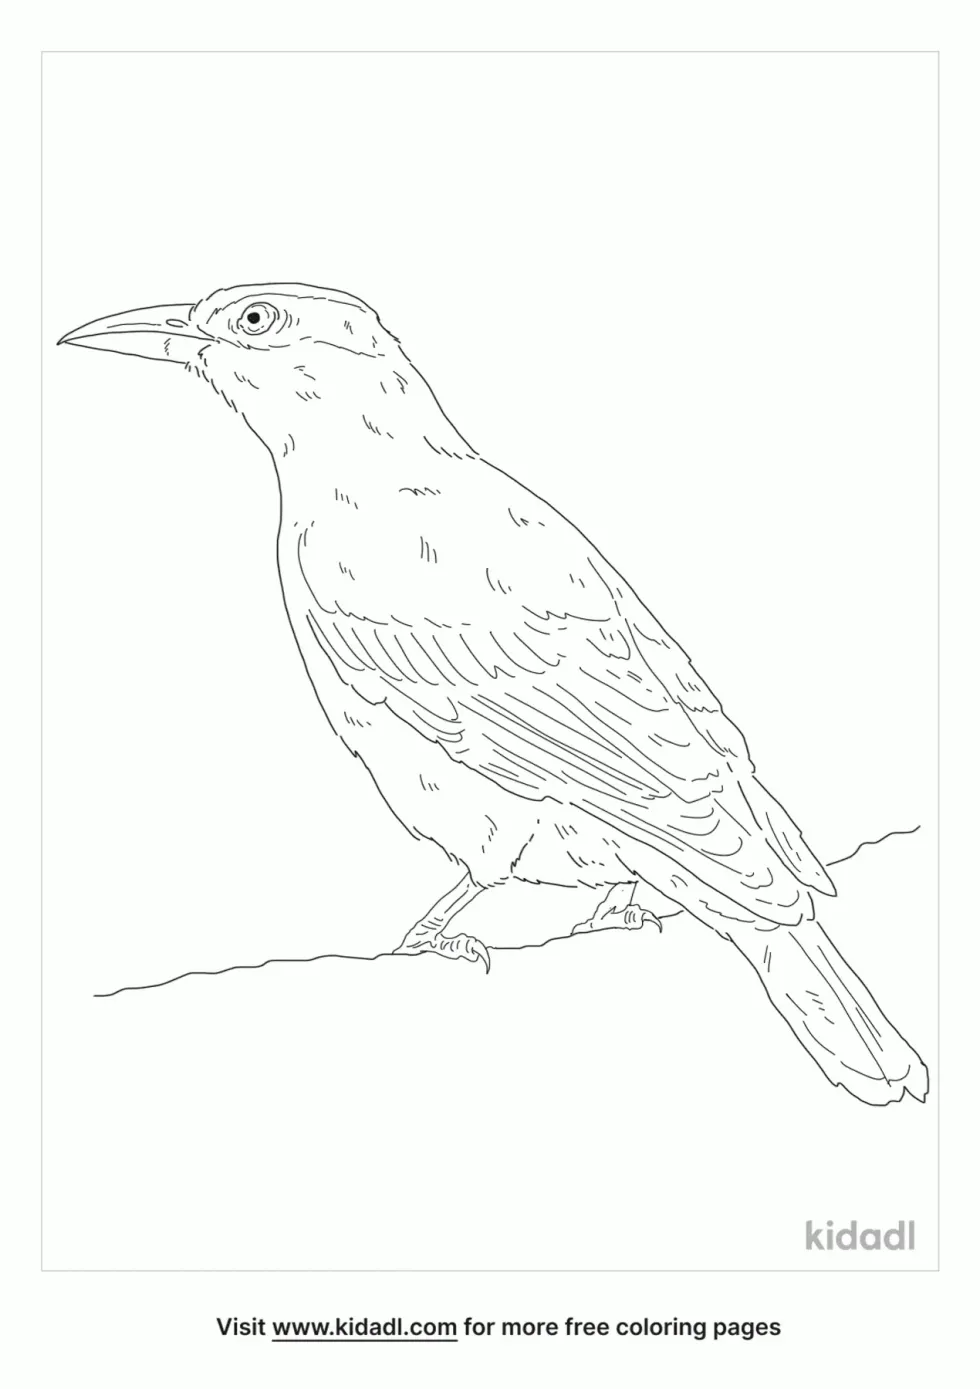 Black Naped Oriole Coloring Page